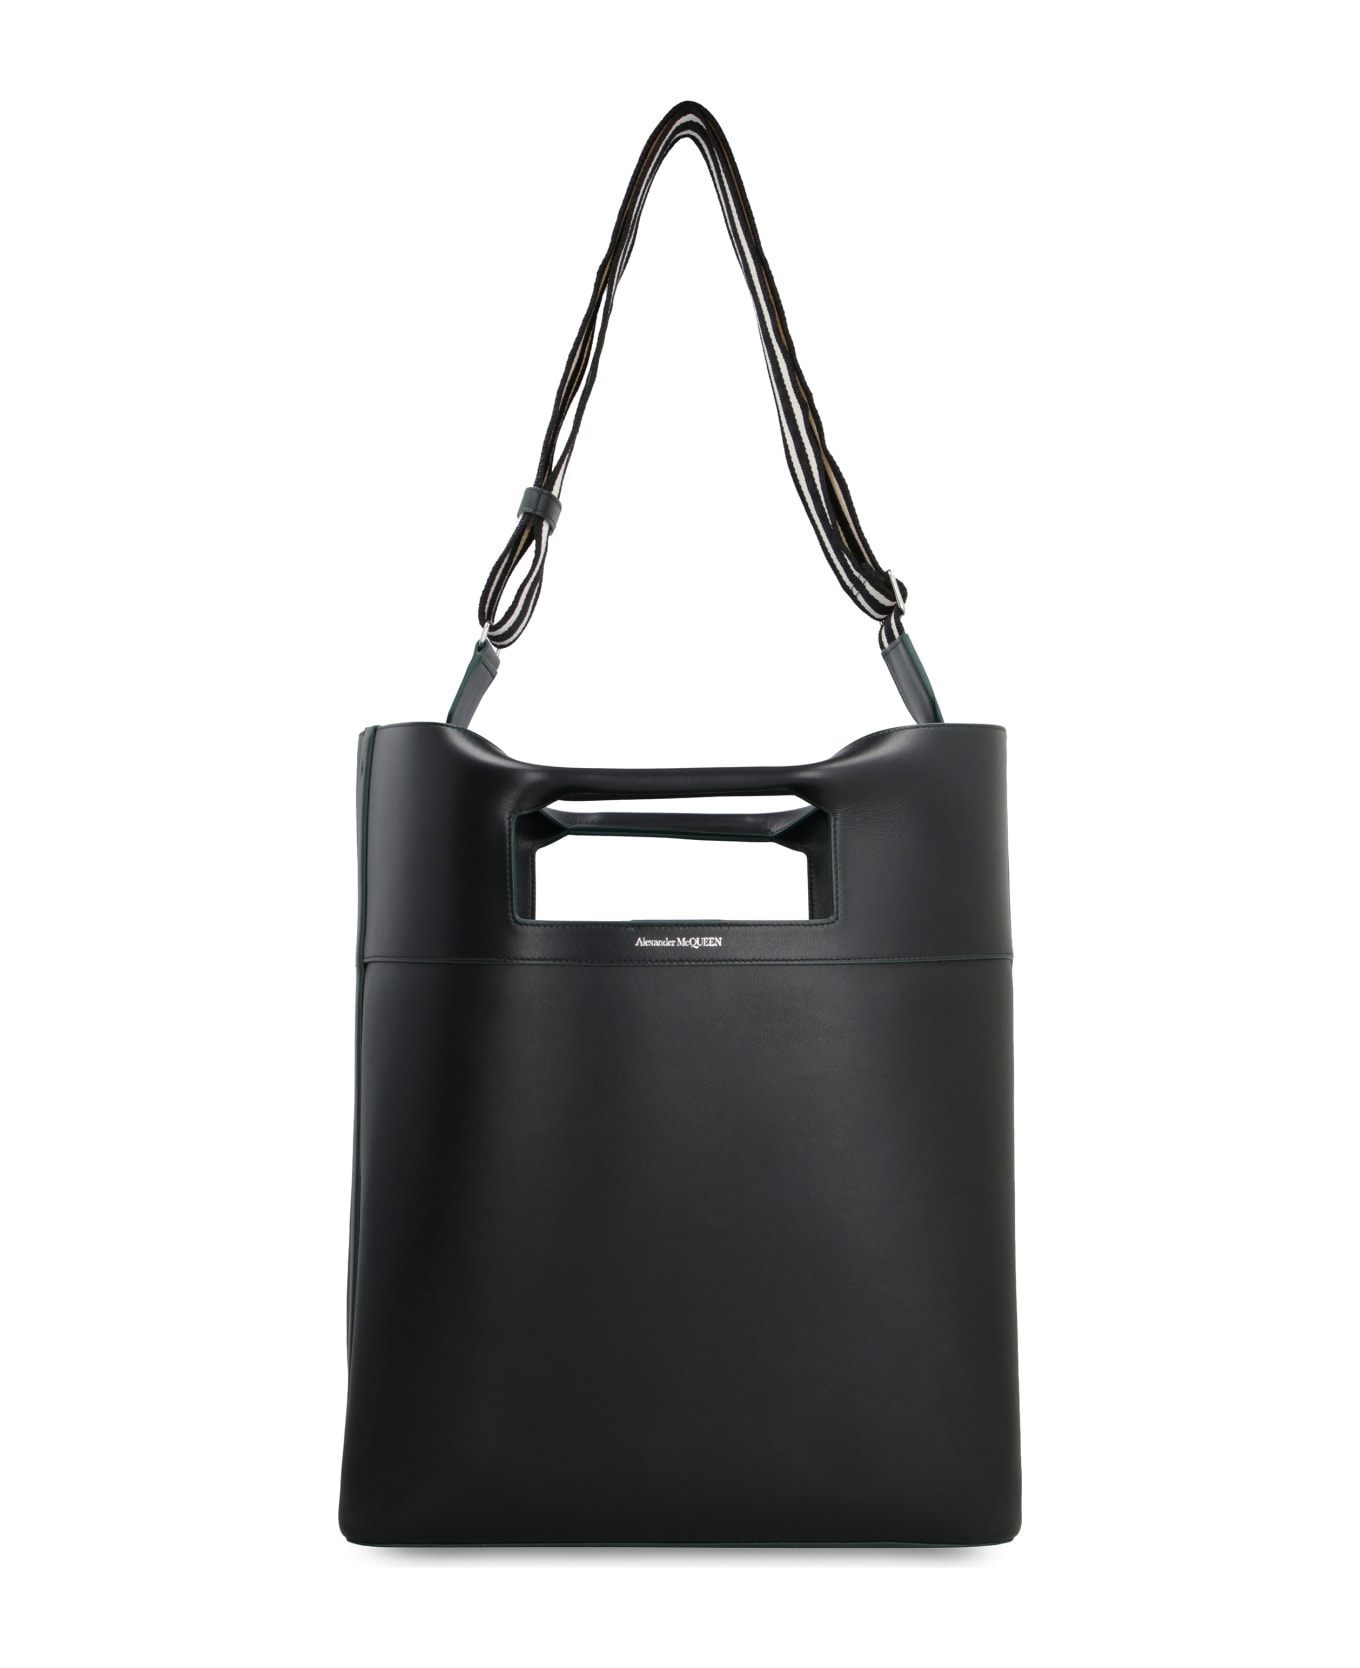 Alexander McQueen The Square Bow Leather Bag - black